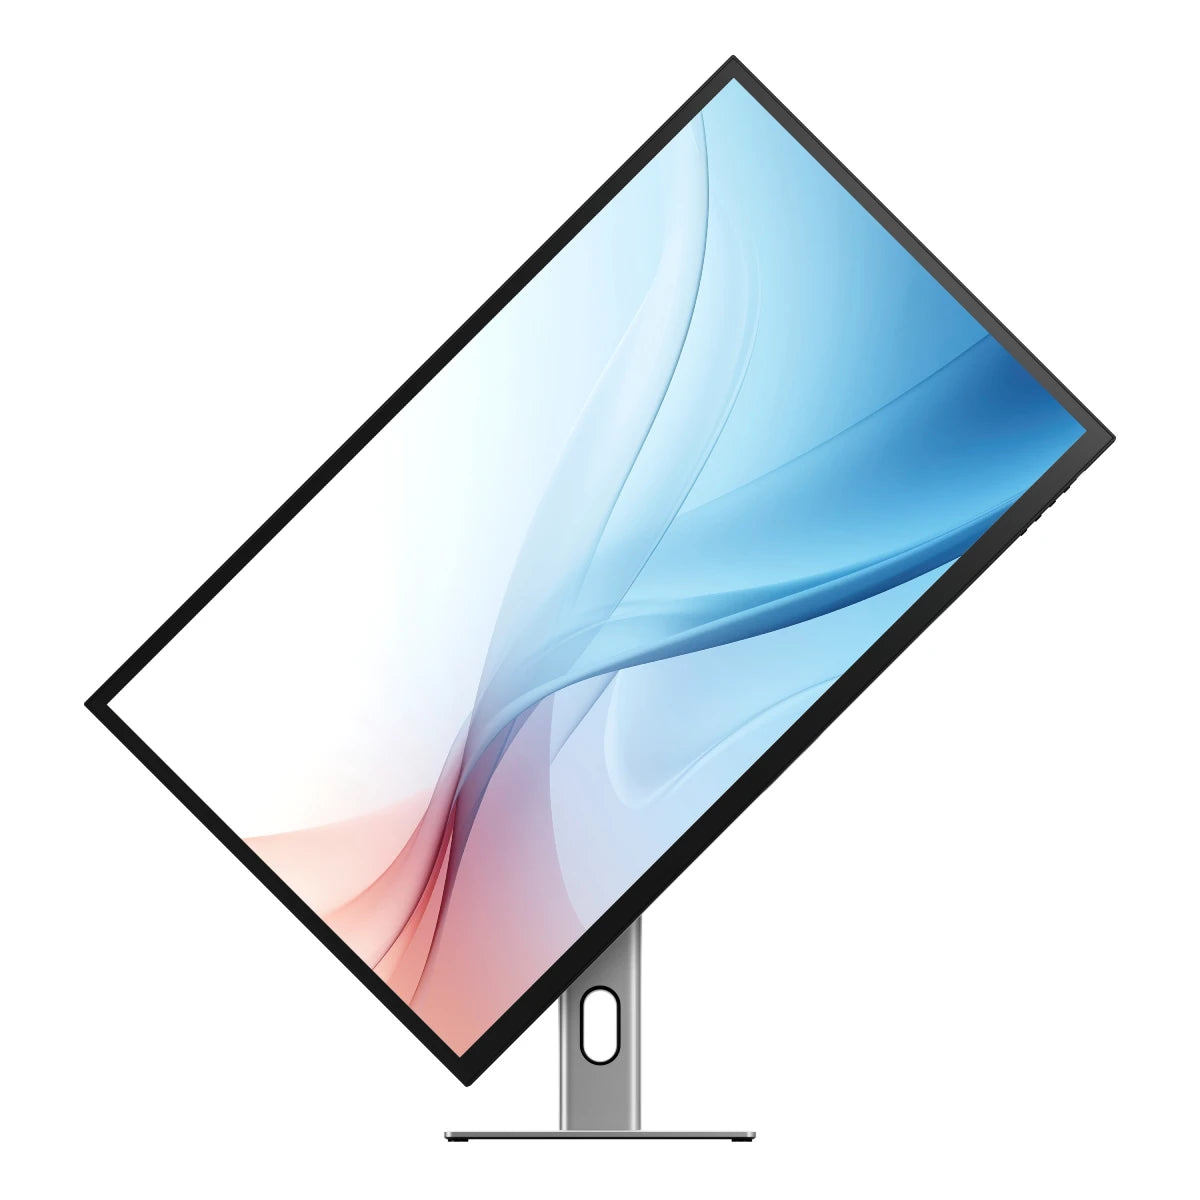 Clarity Max 32" UHD 4K Monitor with USB-C Power Delivery